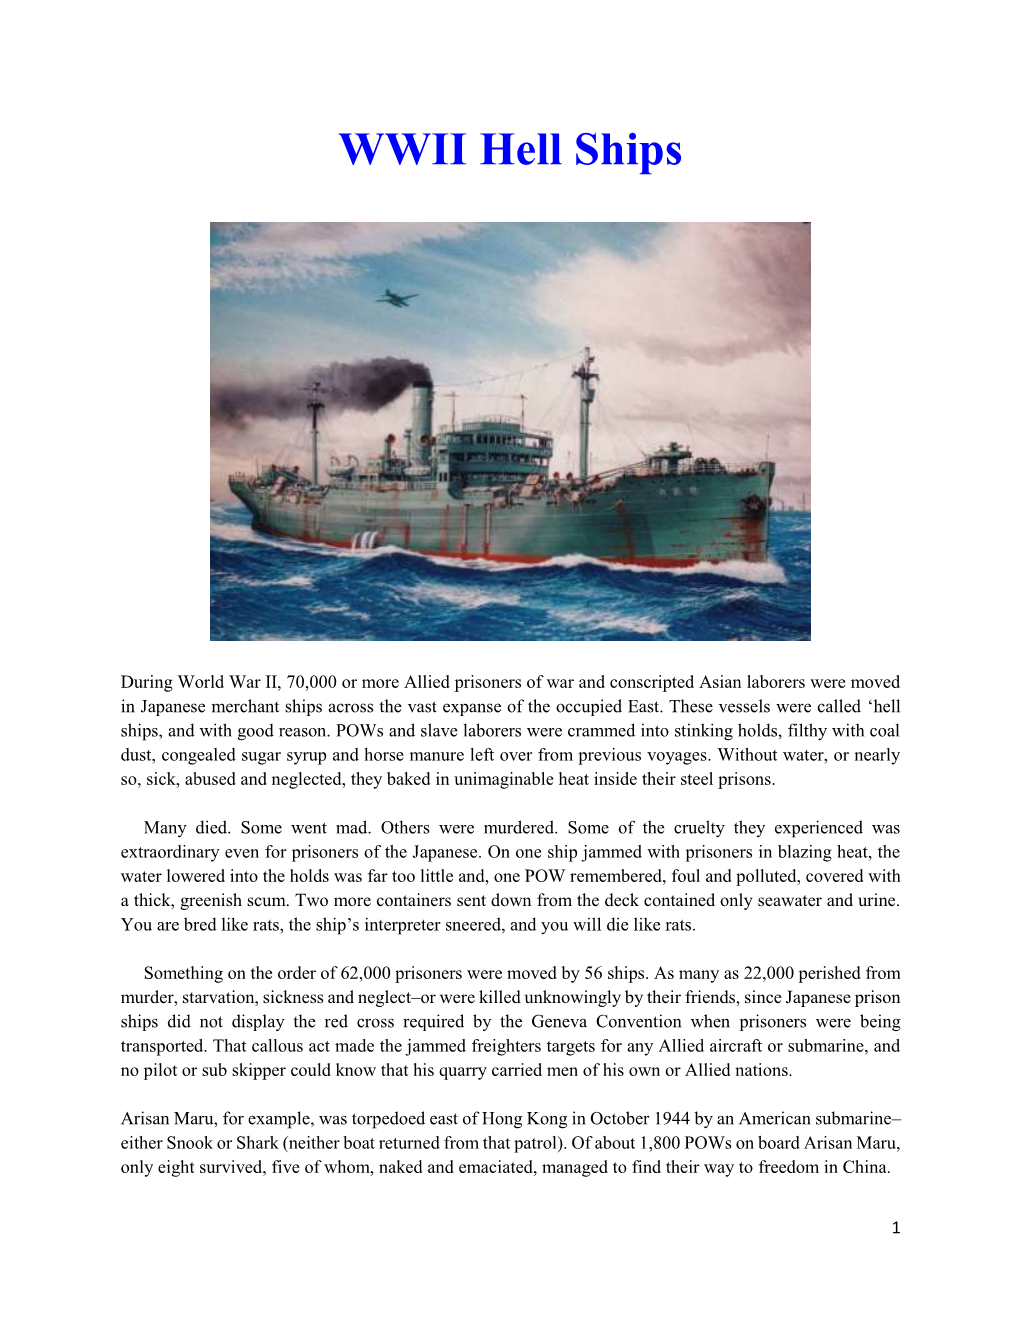 WWII Hell Ships